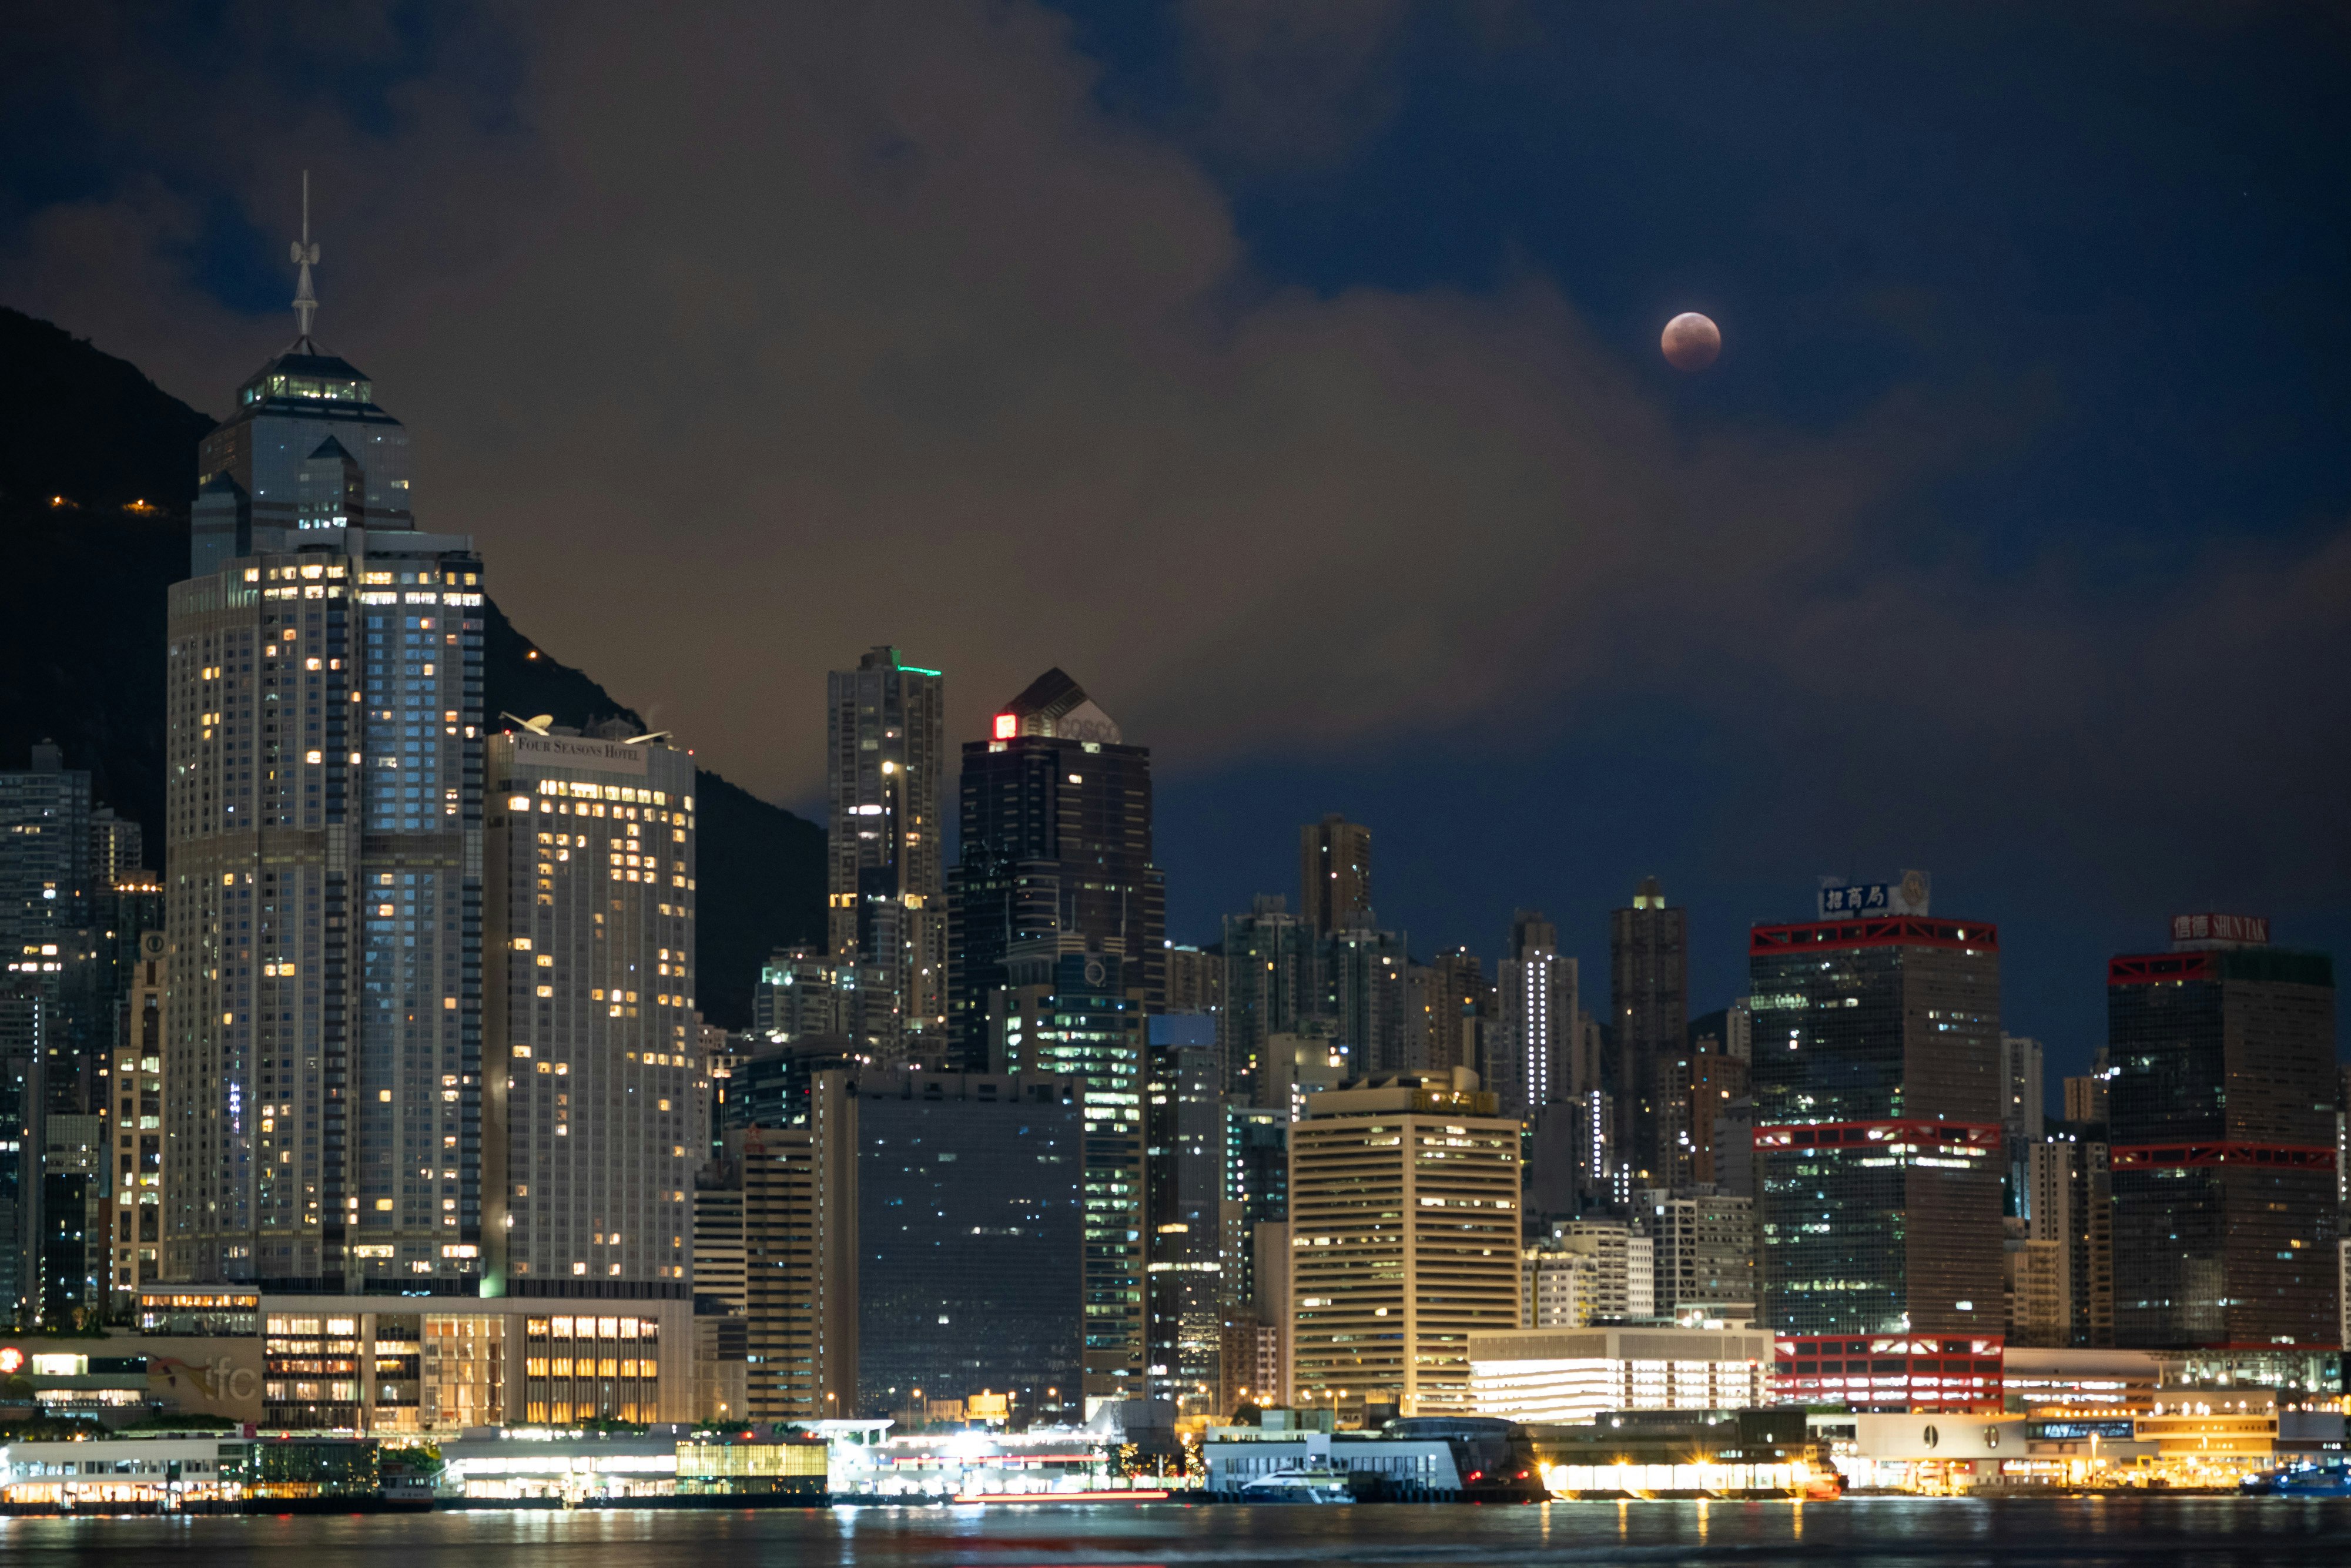 The lunar eclipse is seen above the skyscrapers in Hong Kong.